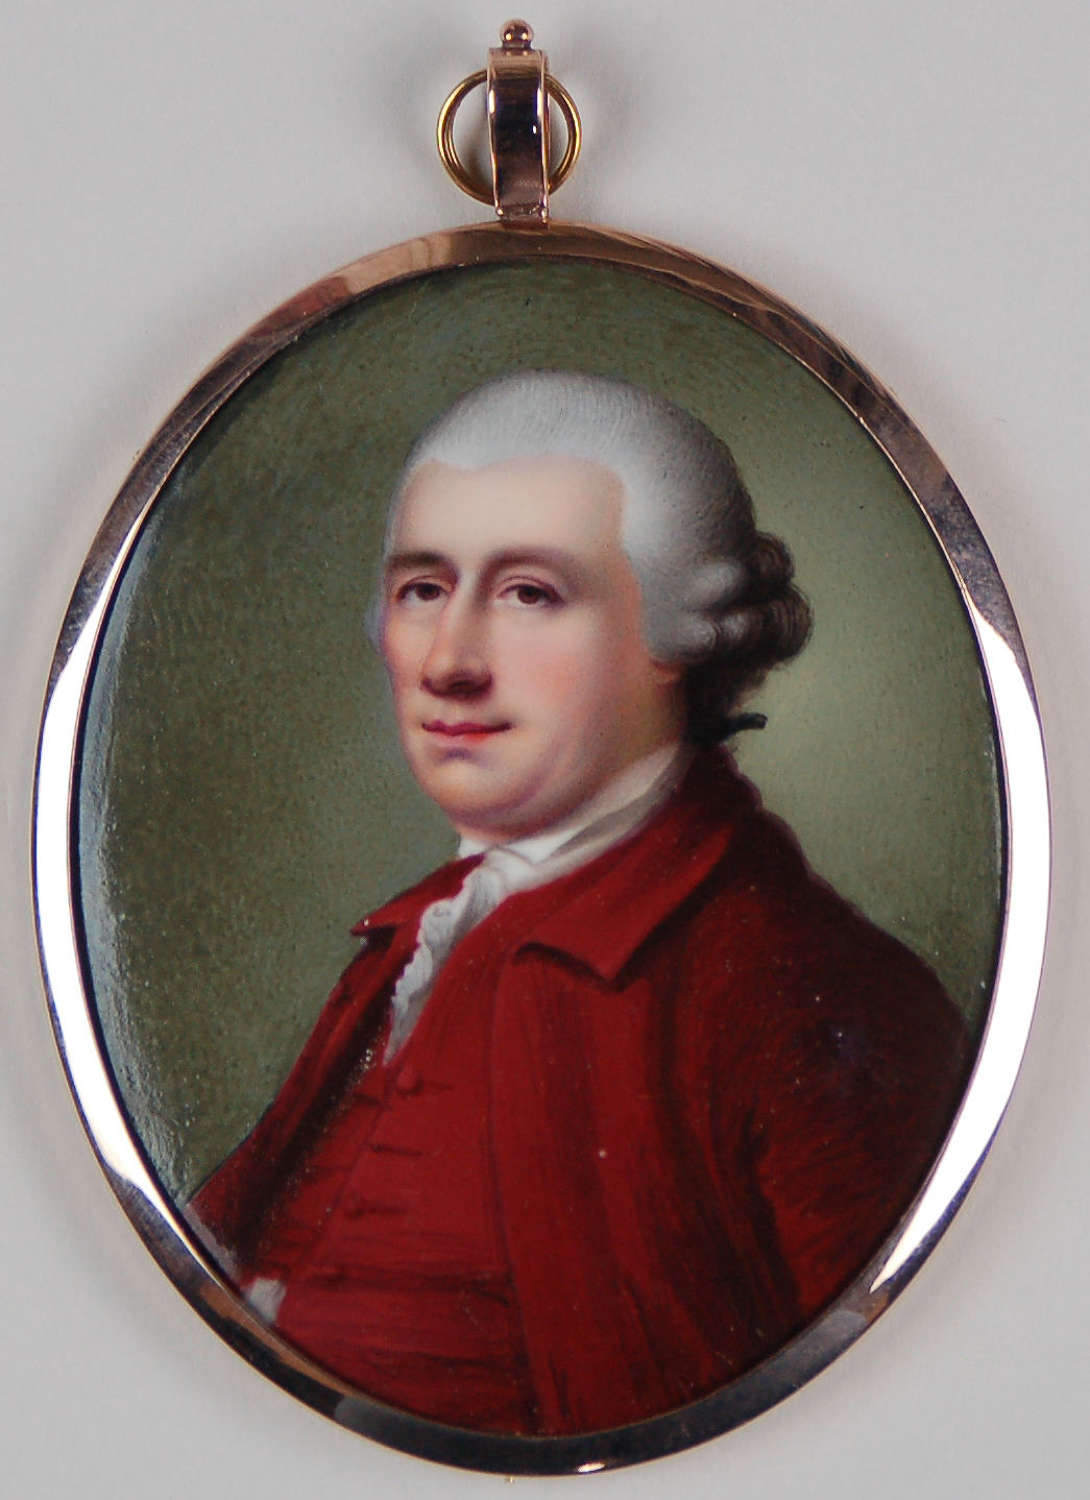 Large miniature of gent on enamel by Spicer C1795